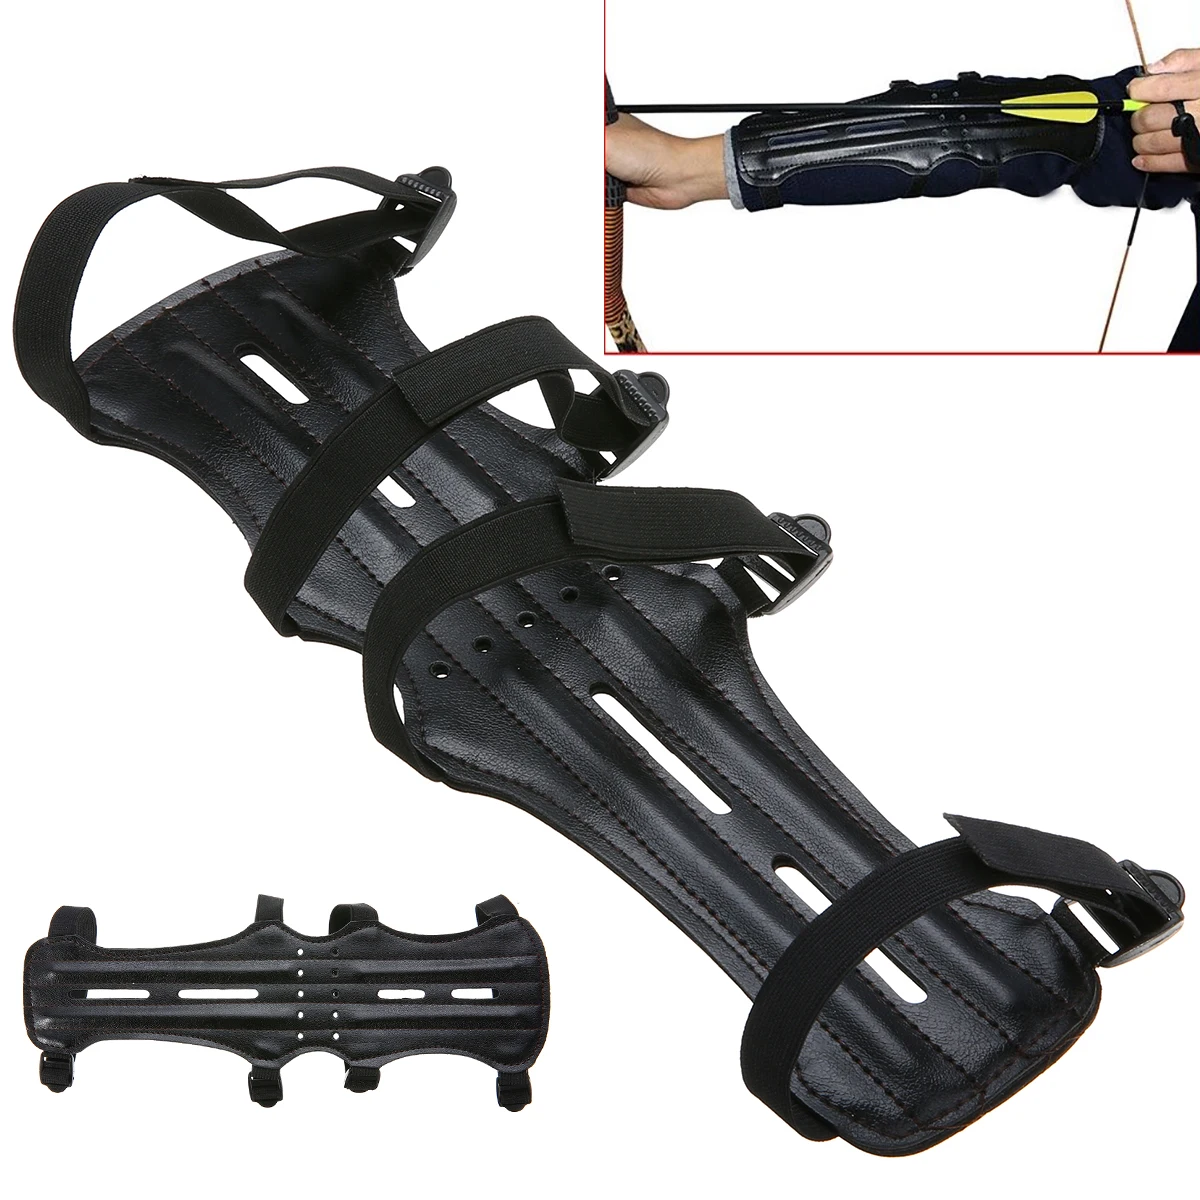 Shooting Archery Arm Guard Bow Protect 4 Straps Black Adjustable Band Leather 